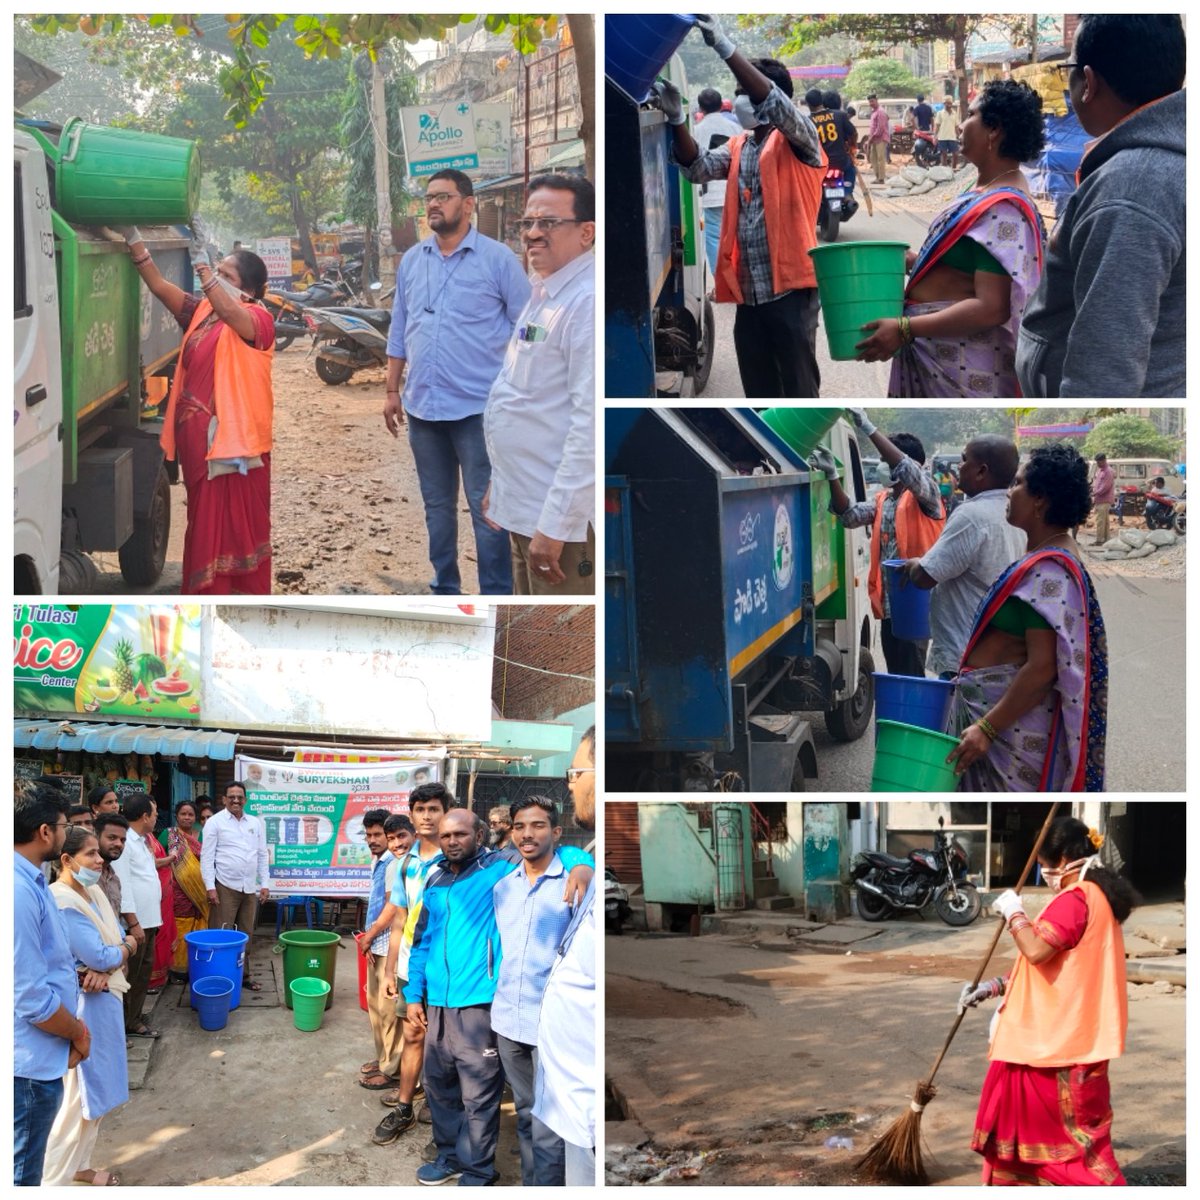 Awareness campaign conducted by GVMC officials to sensitize citizens on source segregation at Kailasapuram road, Ward 46, Zone 5.

#SwachhSurvekshan2023
#SwachhSurvekshan2023Visakhapatnam 
#RGBcampaignVisakhapatnam 
#VizagSaysNotoPlasticSwachhSurvekshan2023Visakhapatnam